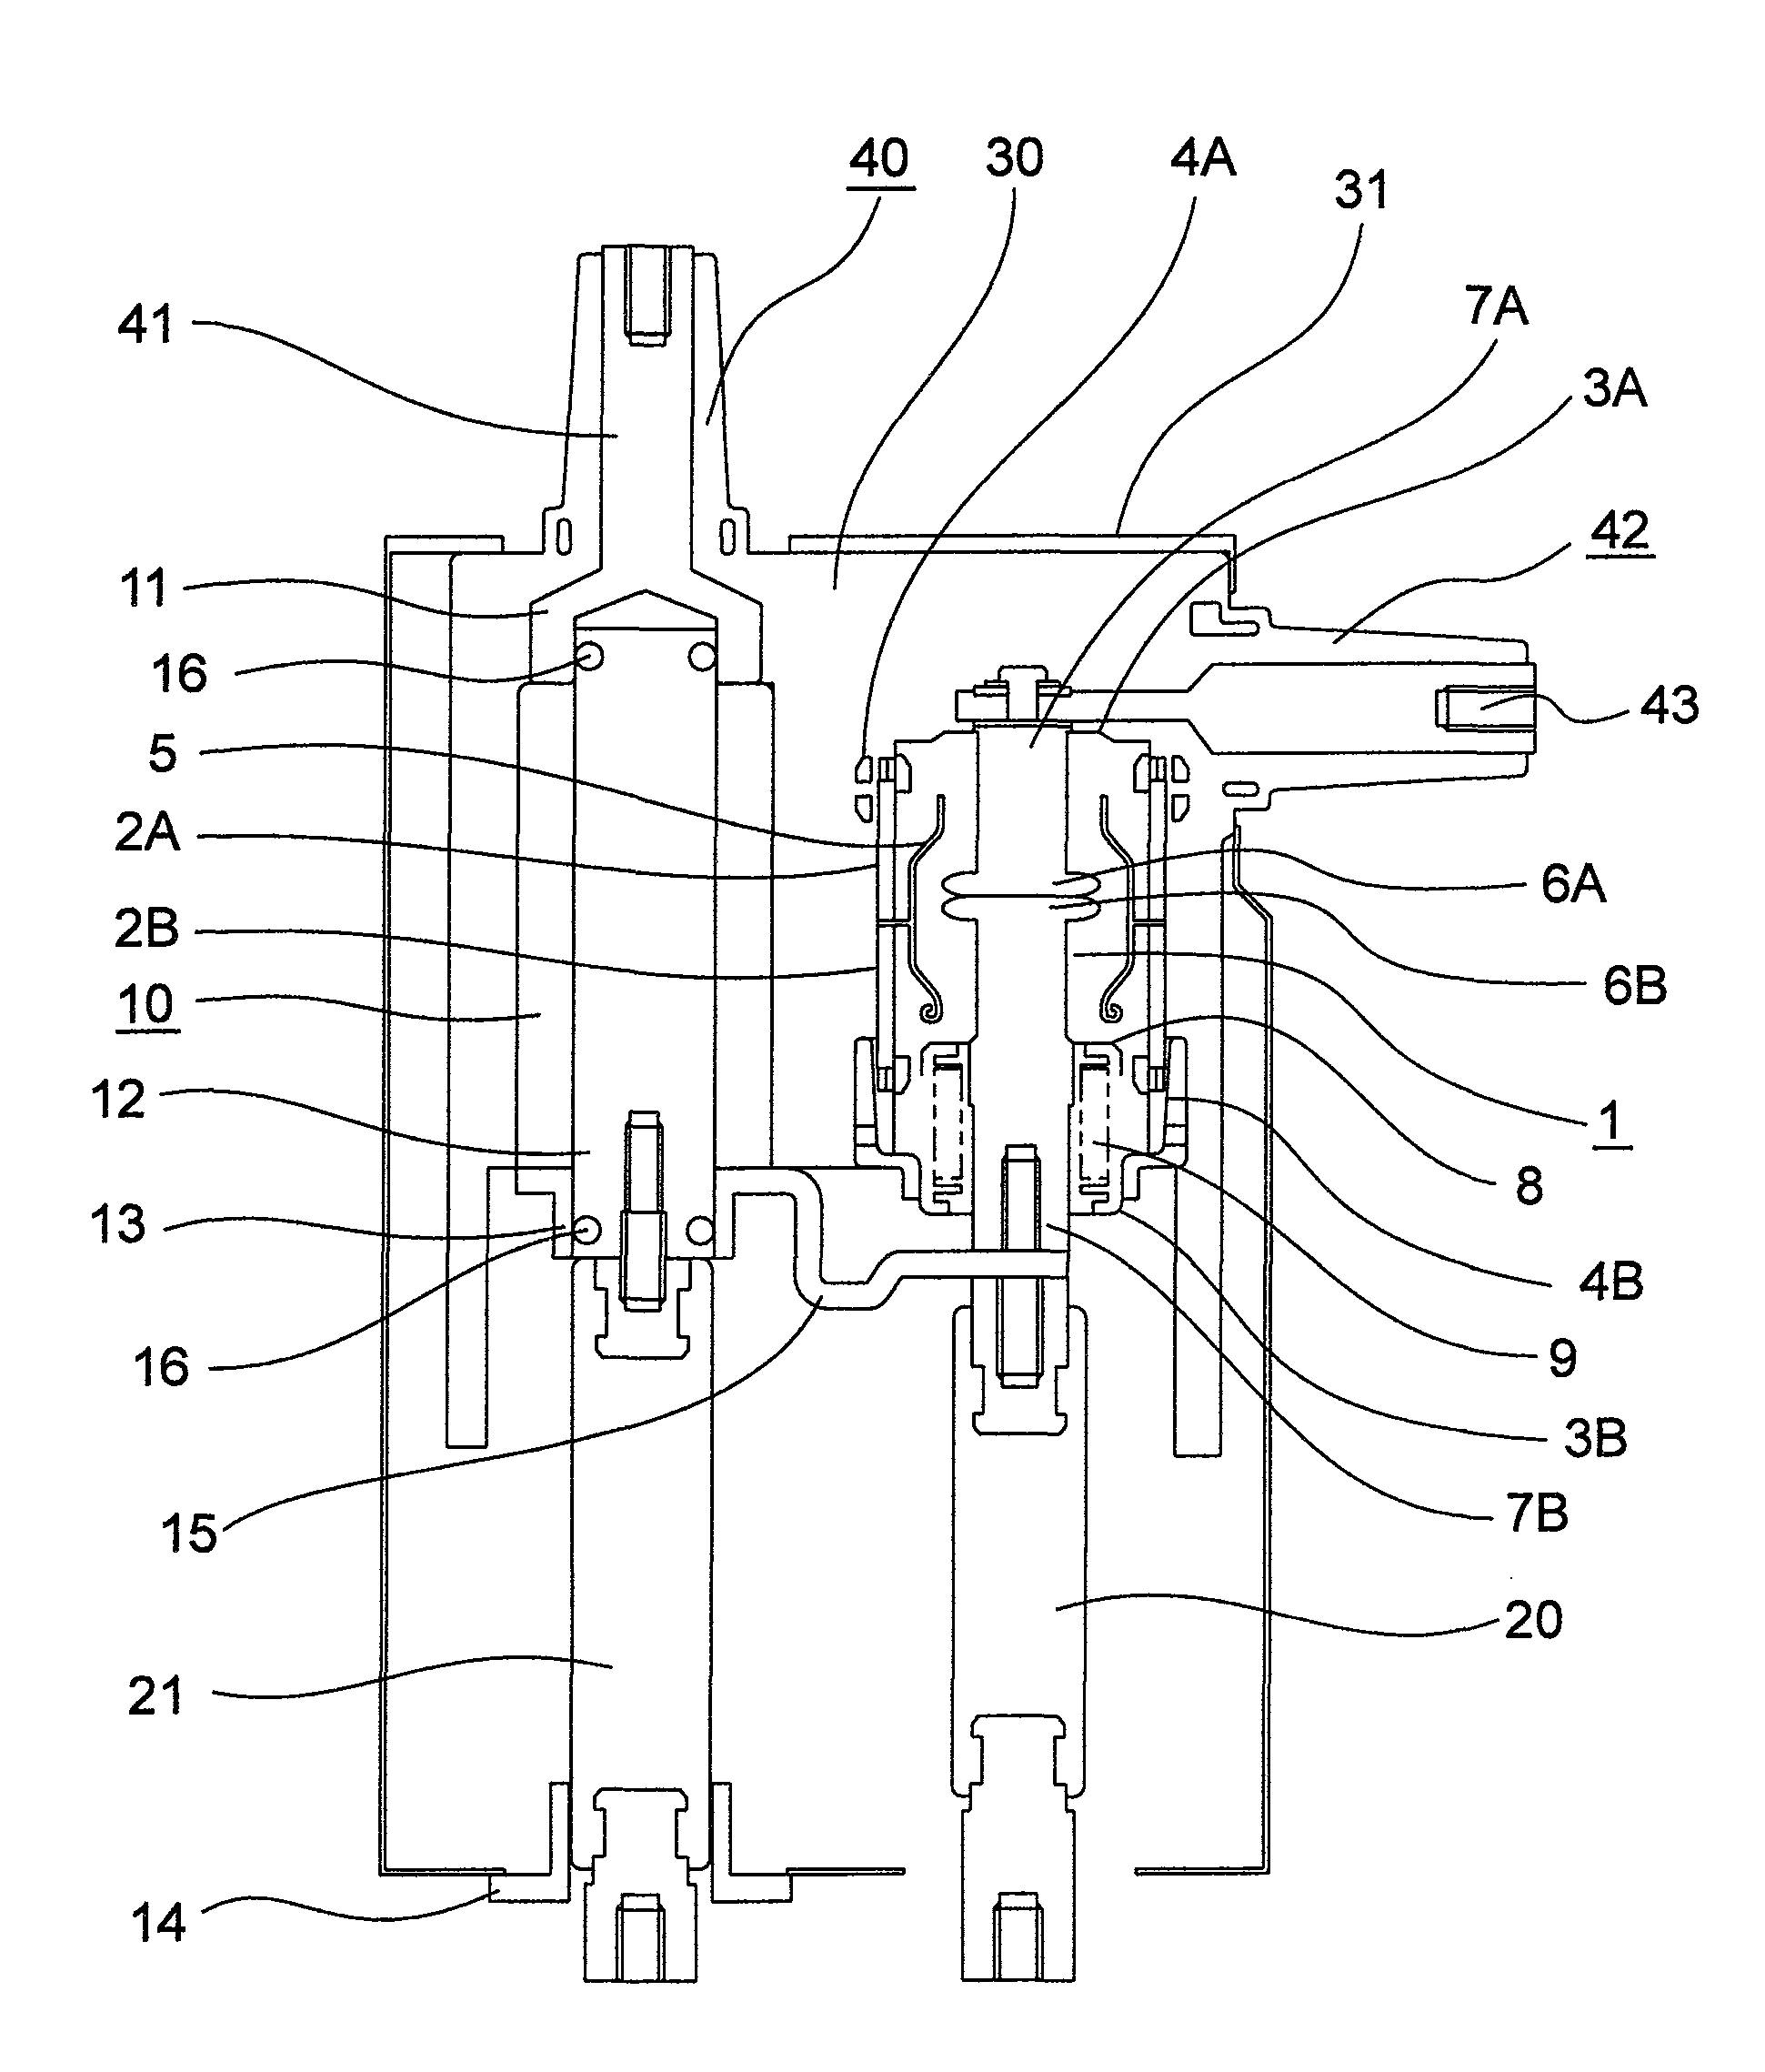 Switchgear and method for operating switchgear